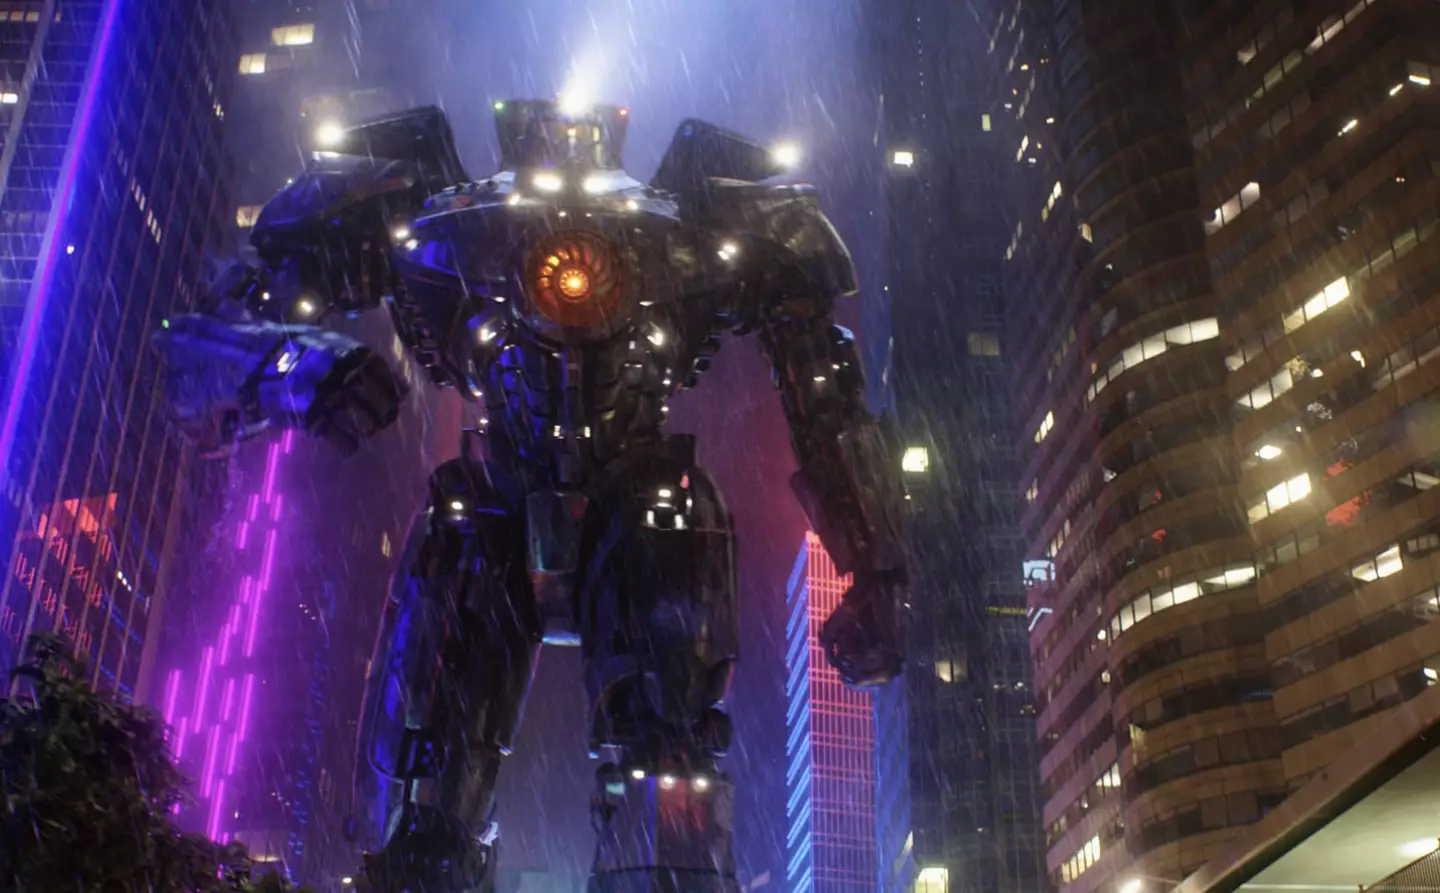 The film’s big bad are known as Kaijus and are massive sky-scraper sized monsters that come from a portal in the ocean.